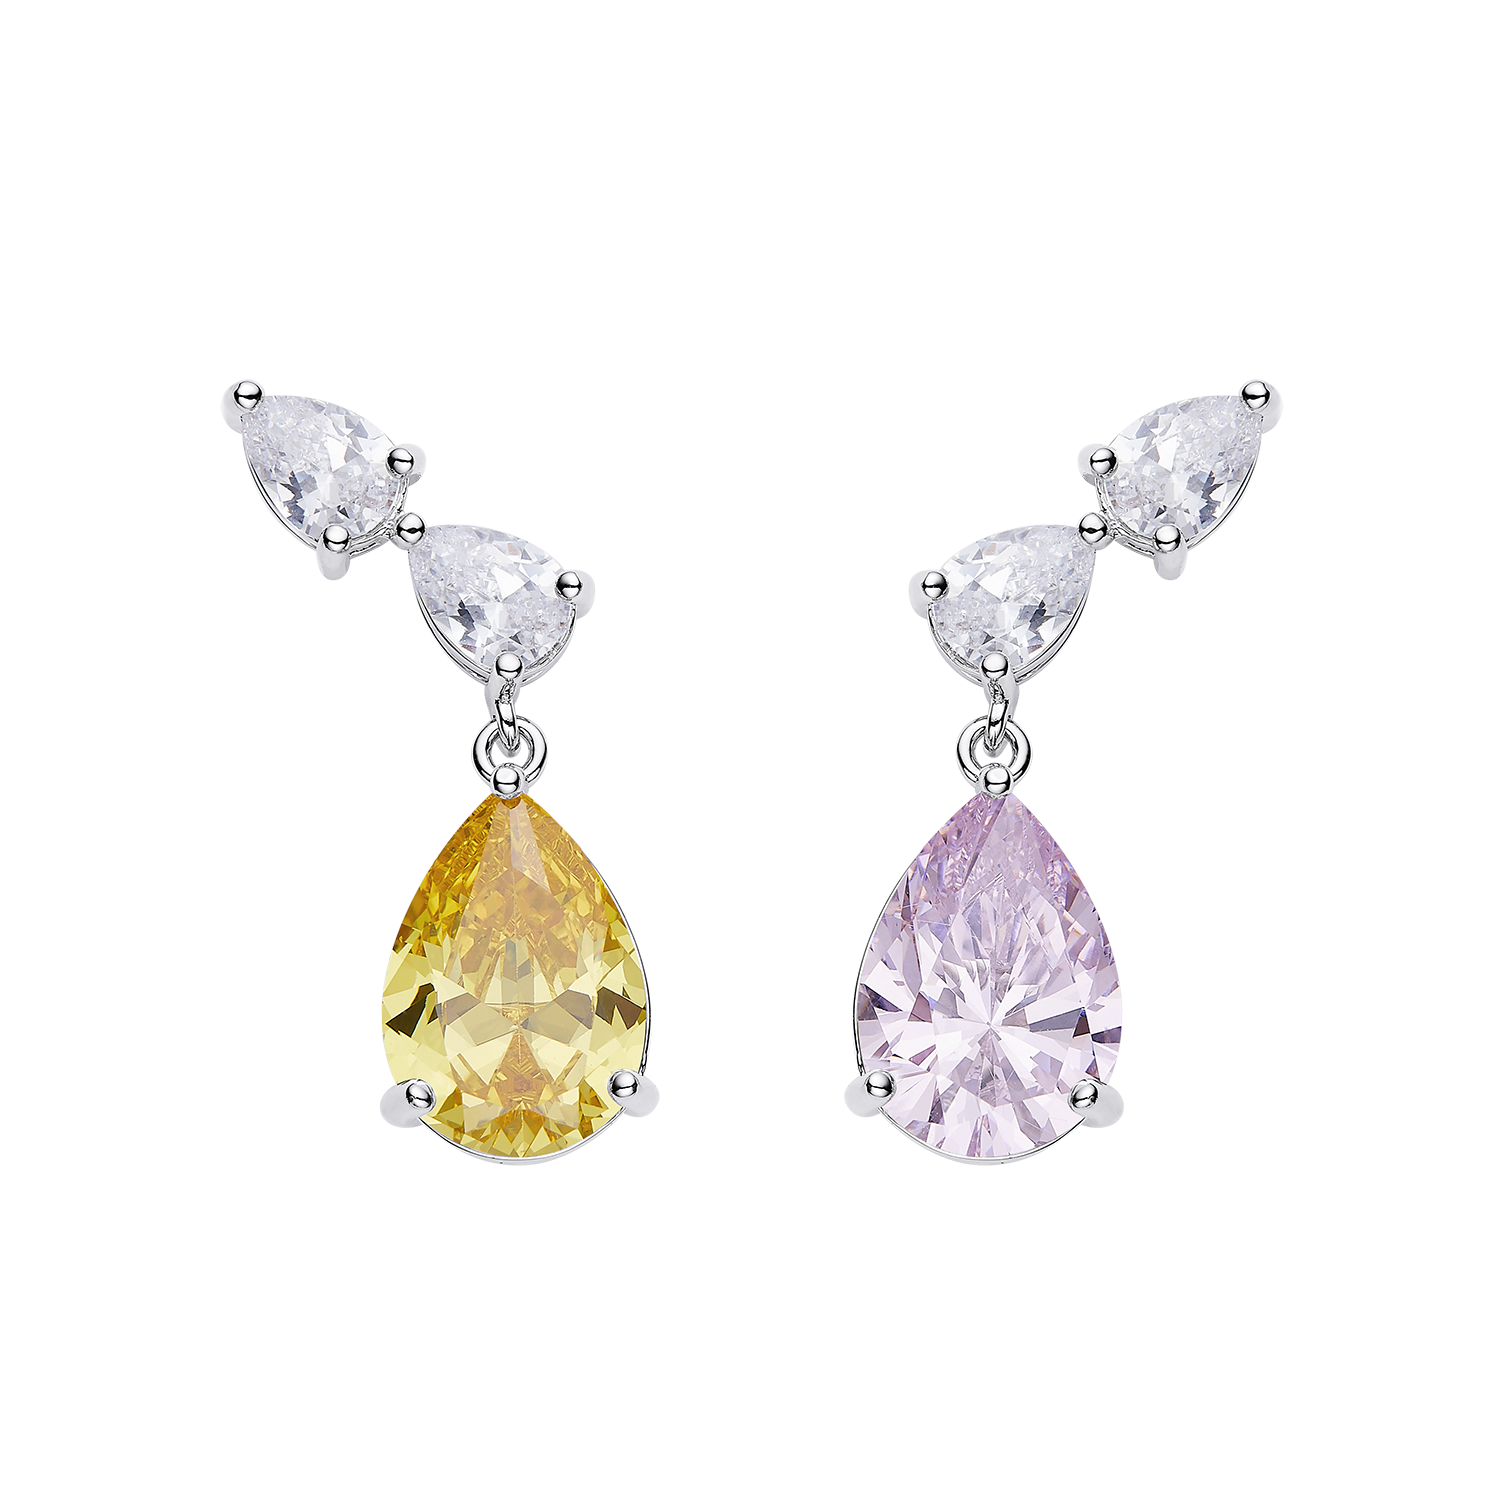 pink and a yellow diamond earrings